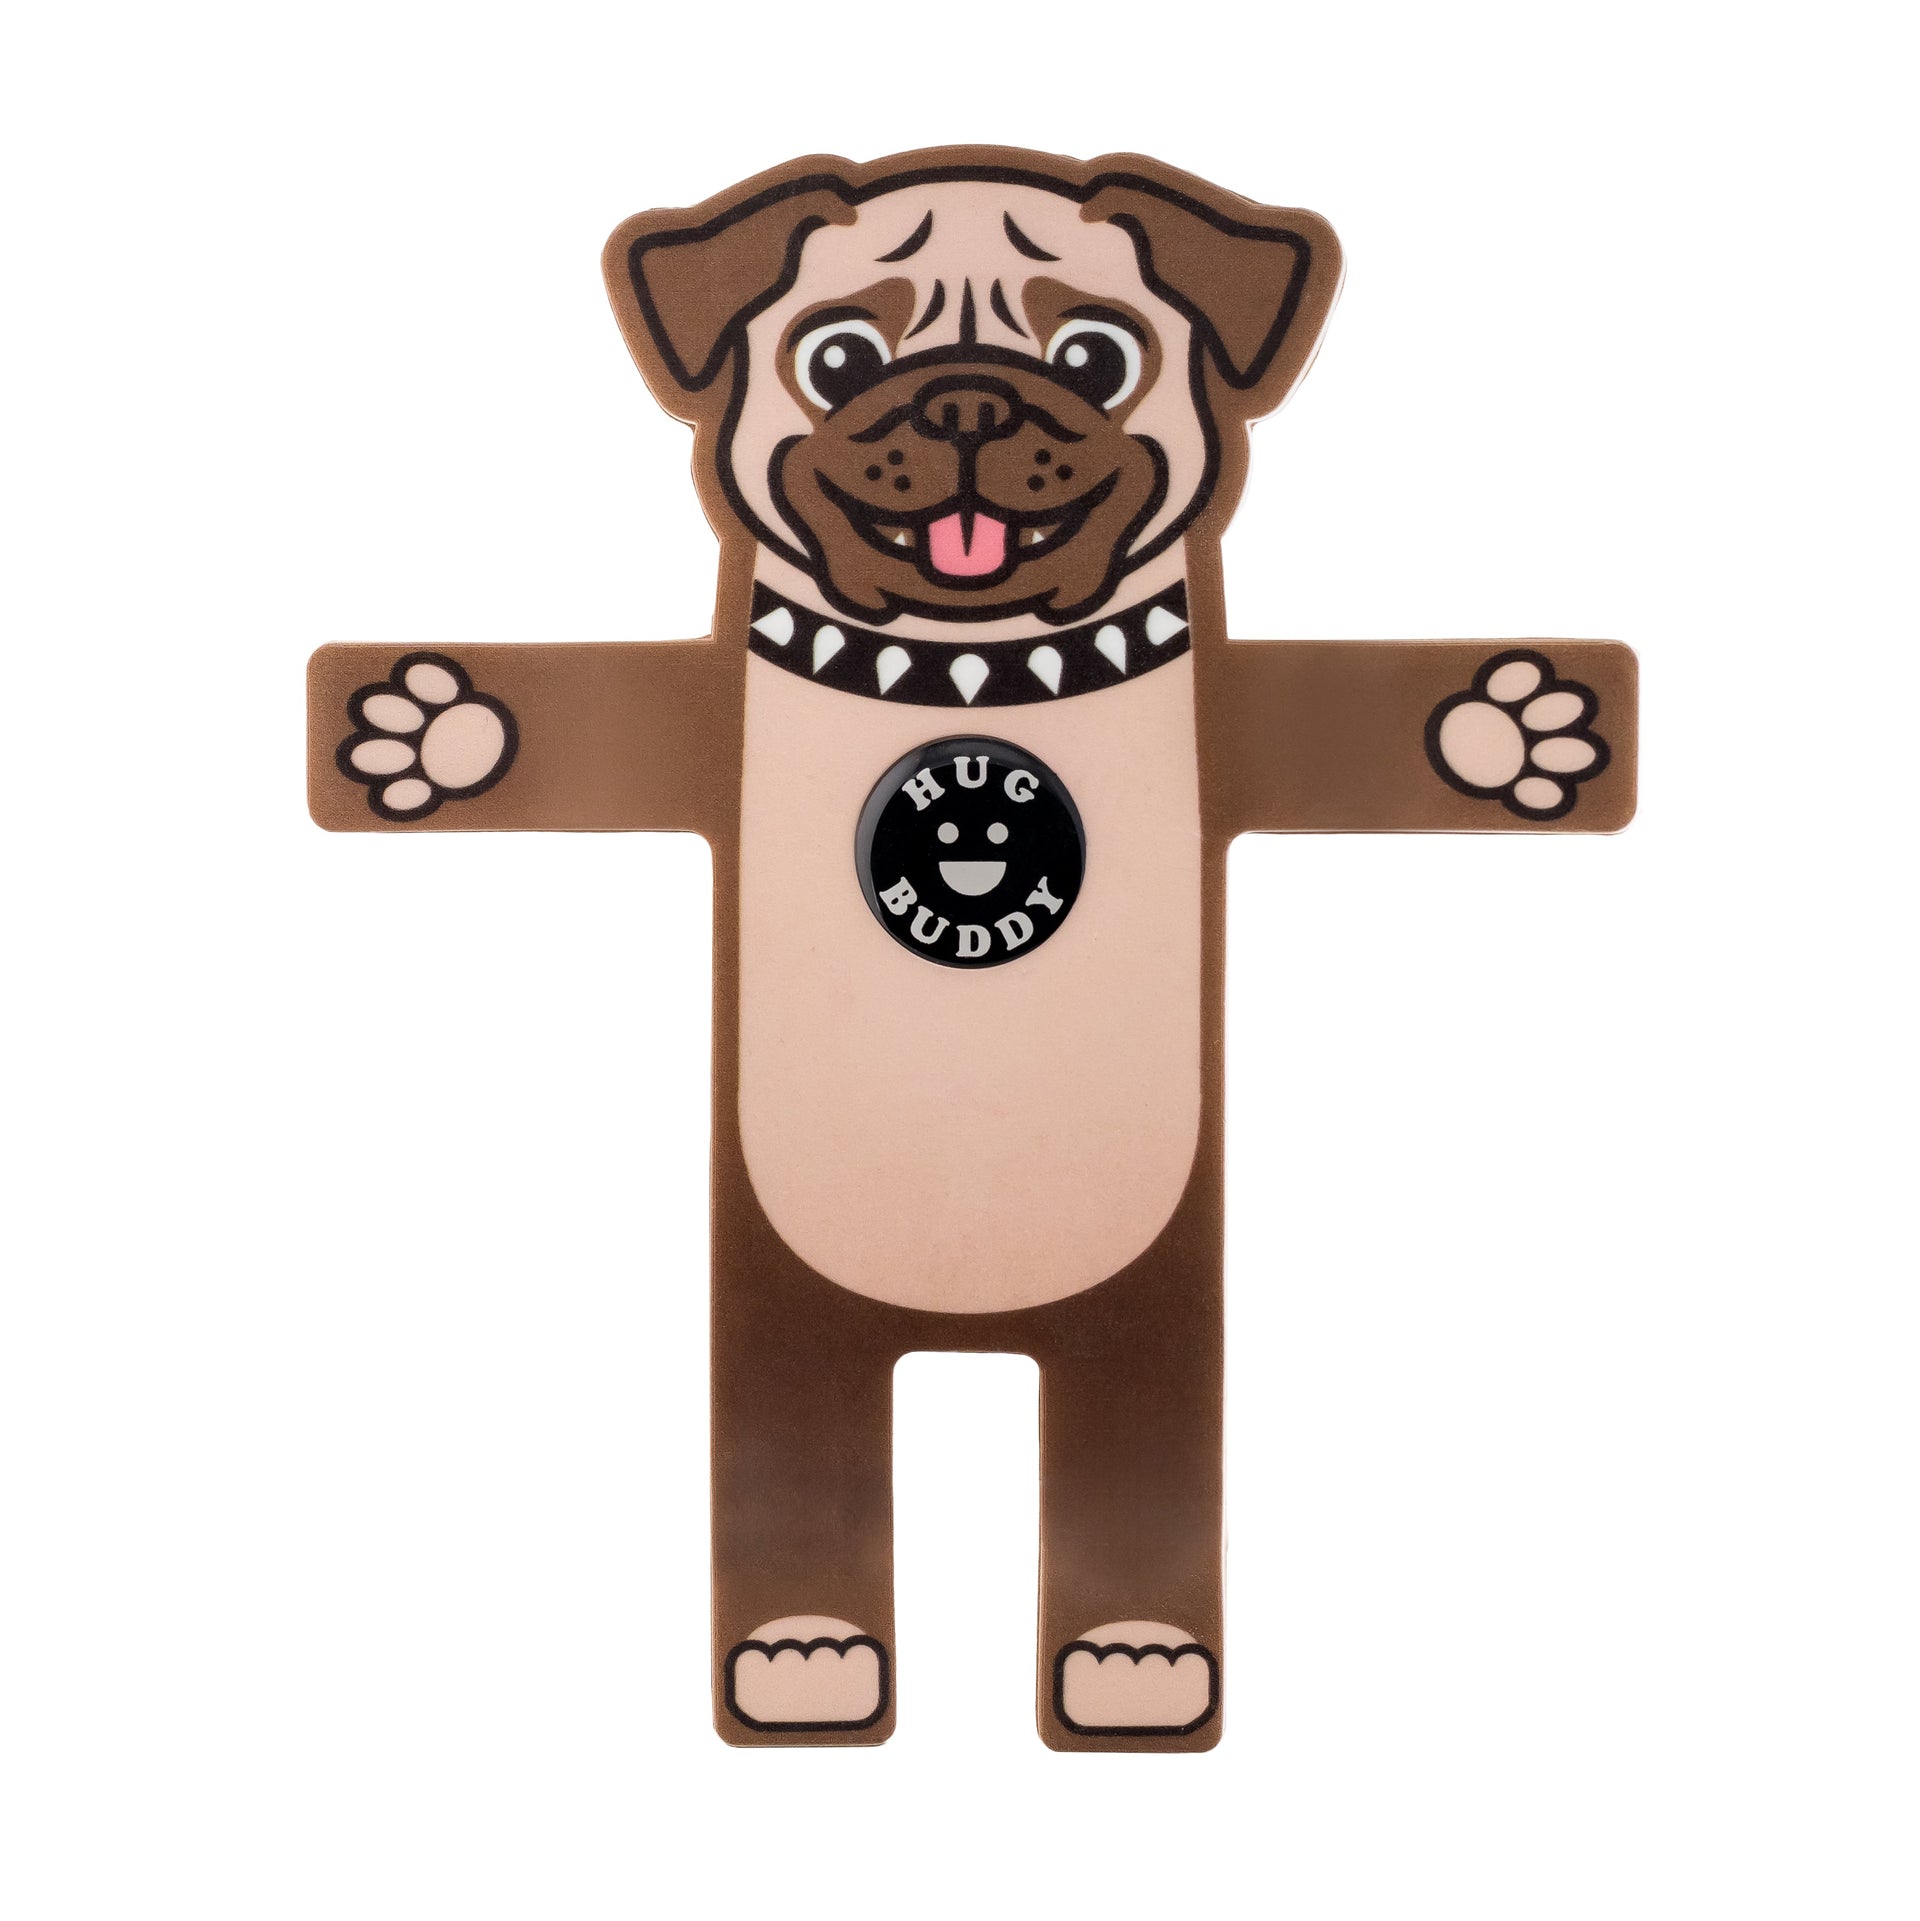 Image of Pug the dog Hug Buddy with arms and legs in the open position on a white background